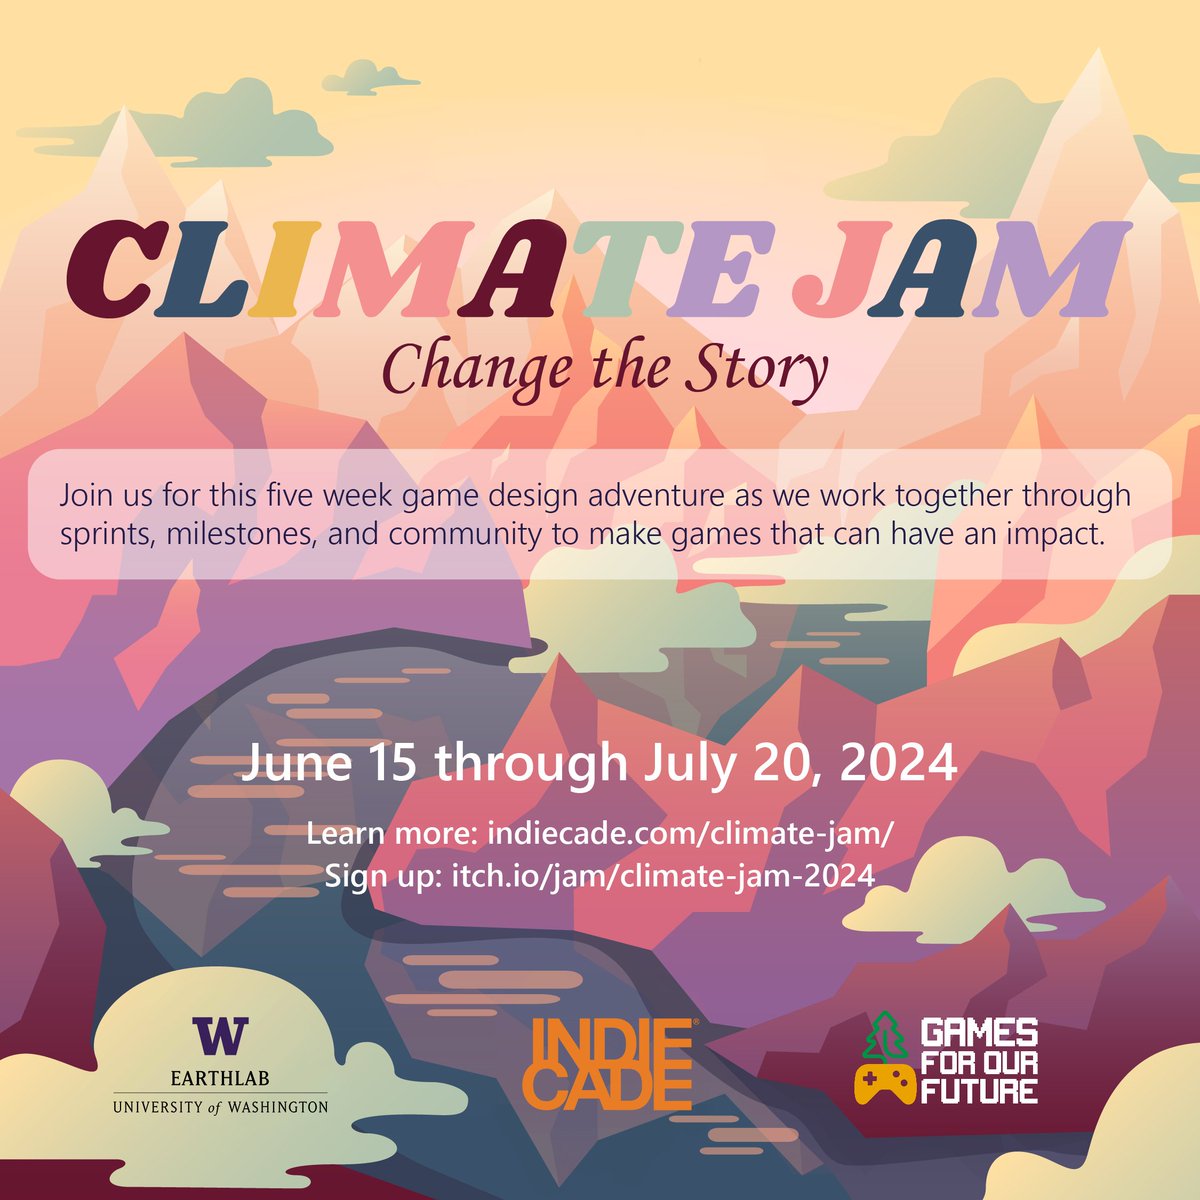 Happy Earth Day! We're excited to announce this year's Climate Jam theme: 'Change the Story' Learn more and mark your calendars! indiecade.com/climate-jam/ @uwearthlab @GamesForOurFut1 @IGDAClimateSIG #gamejam #earthday #indiegames #indiedevs #climatechange #climatejam